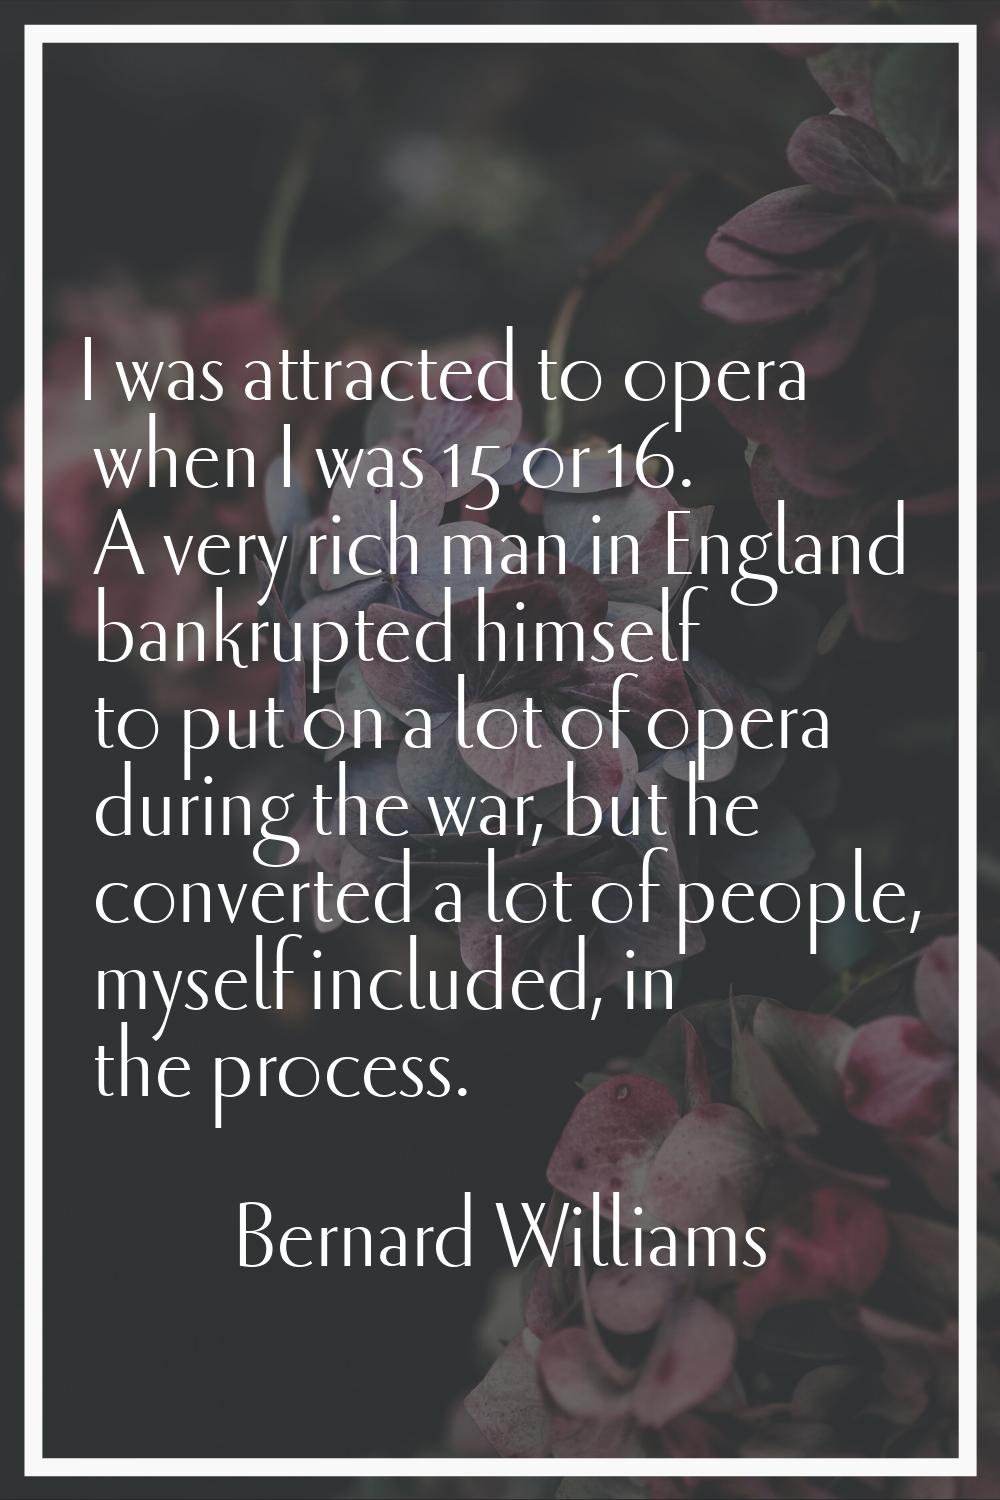 I was attracted to opera when I was 15 or 16. A very rich man in England bankrupted himself to put 